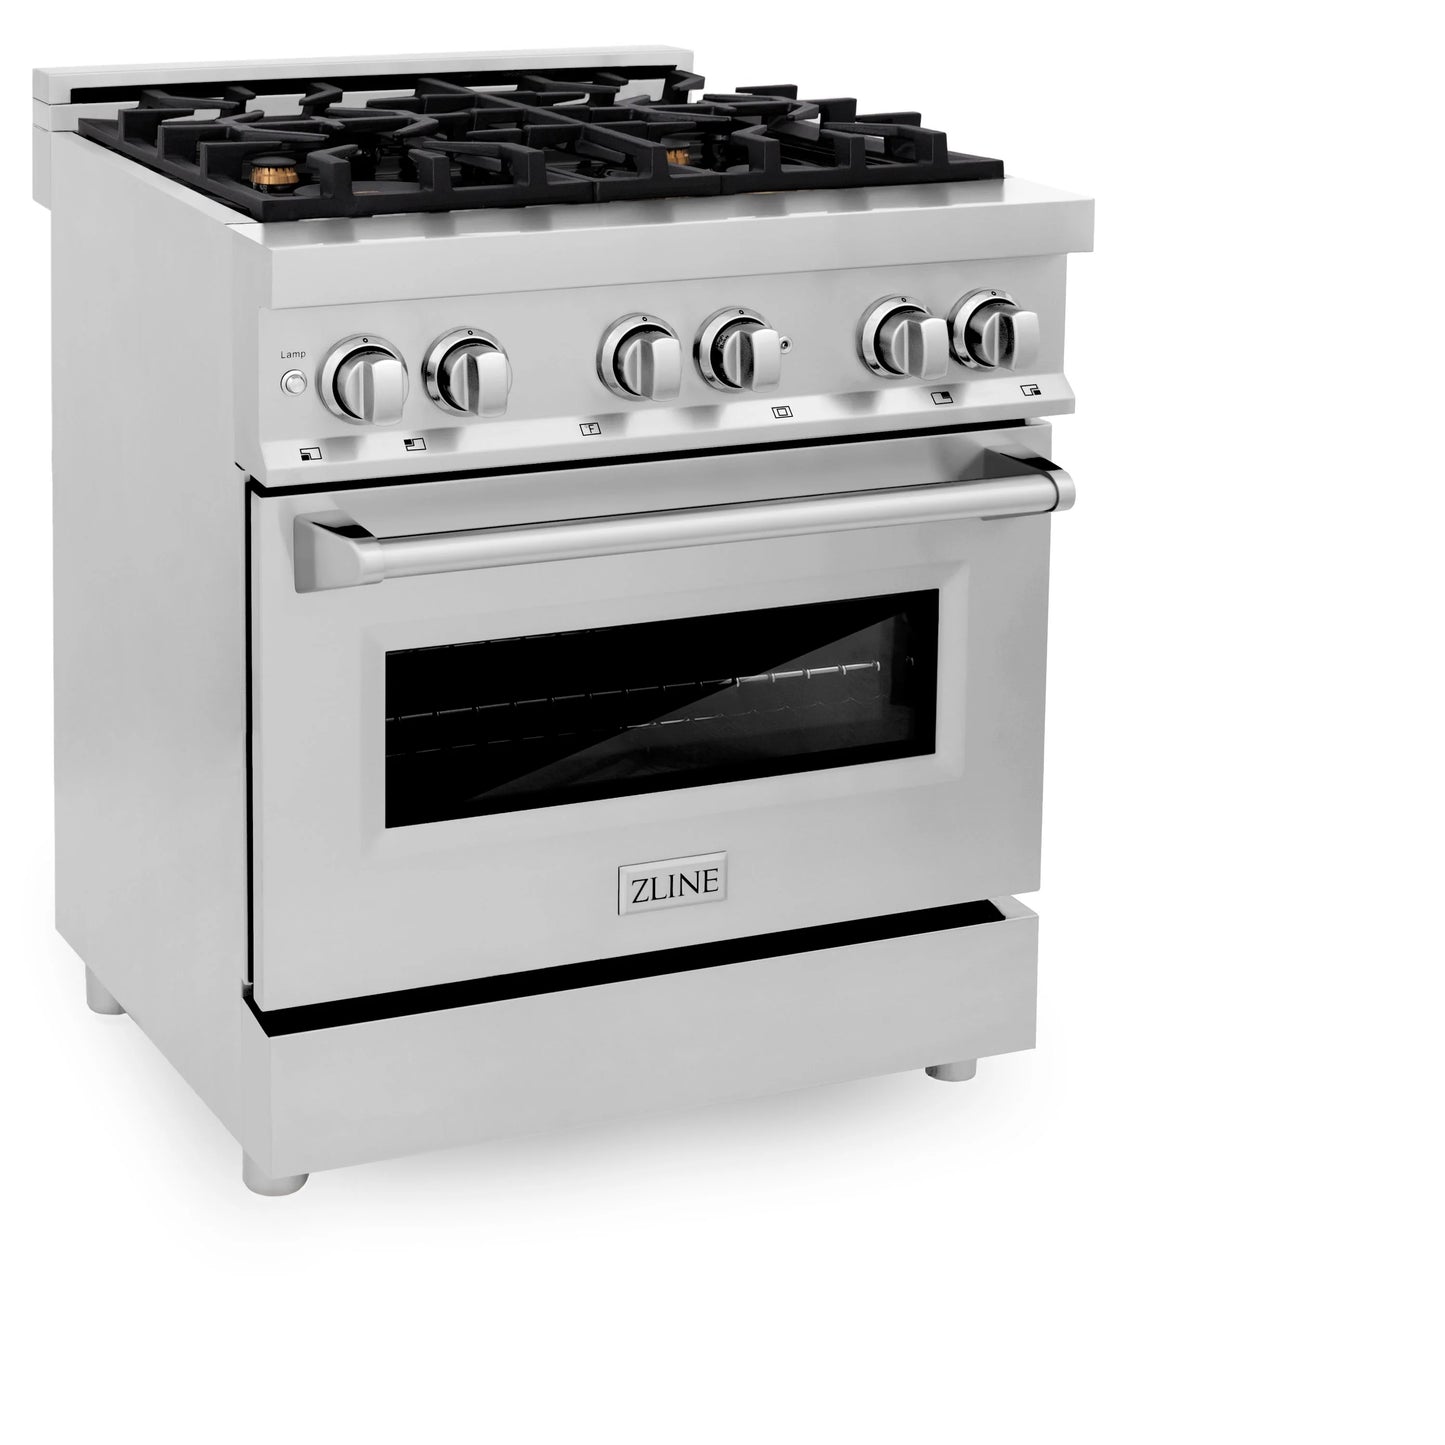 ZLINE 30 in. Dual Fuel Range with Gas Stove and Electric Oven in Stainless Steel and Brass Burners (RA-BR-30)